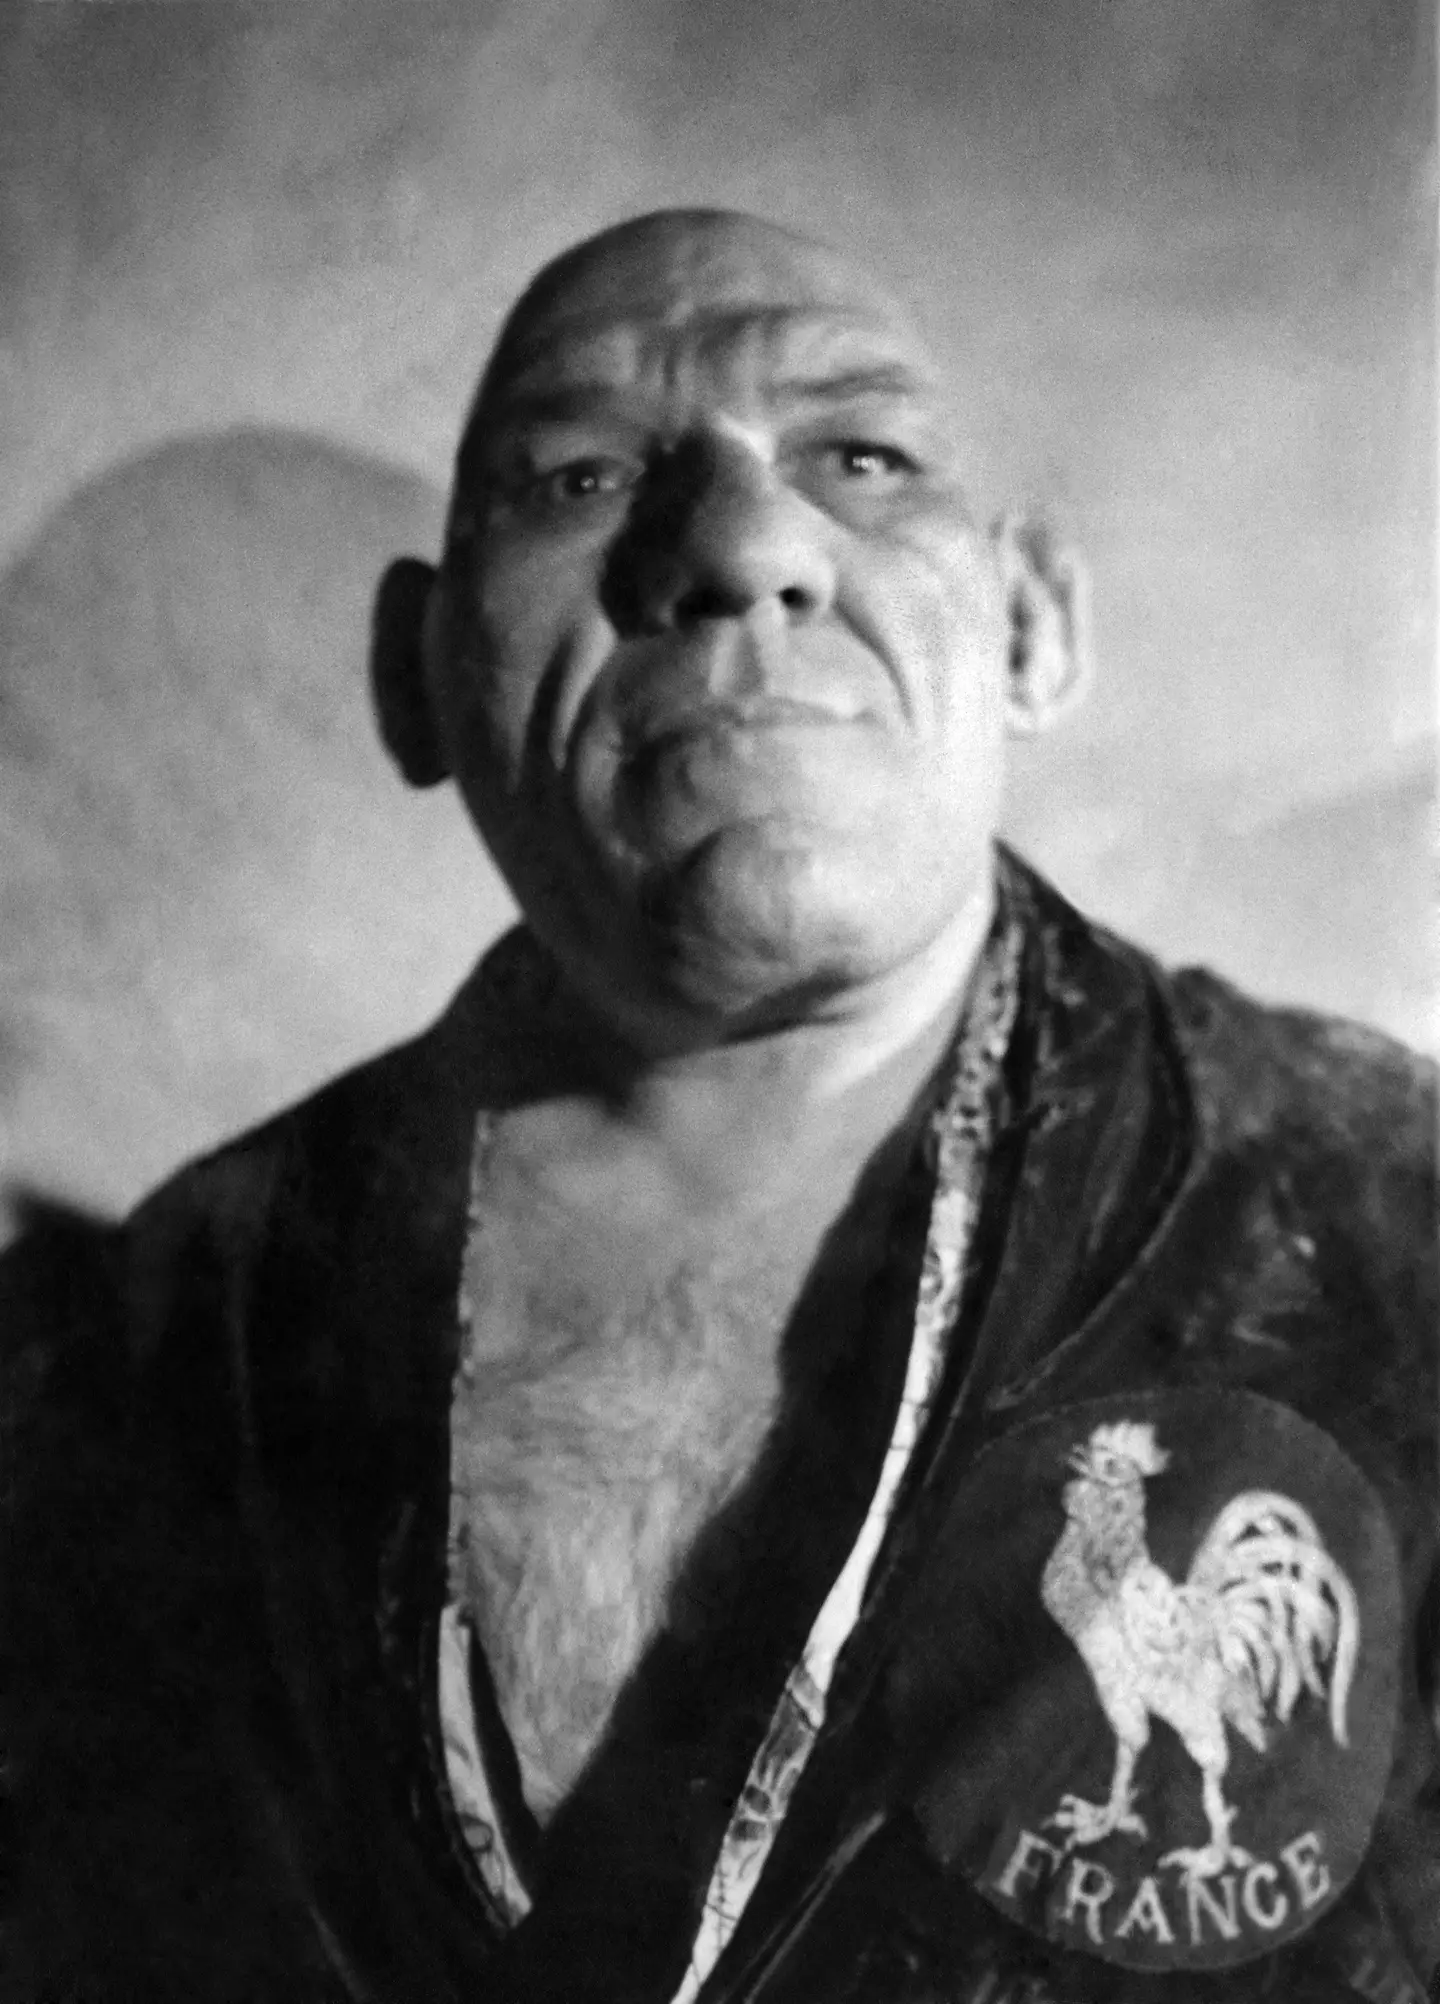 Maurice Tillet was originally born in Russia, but began his wrestling career in France.